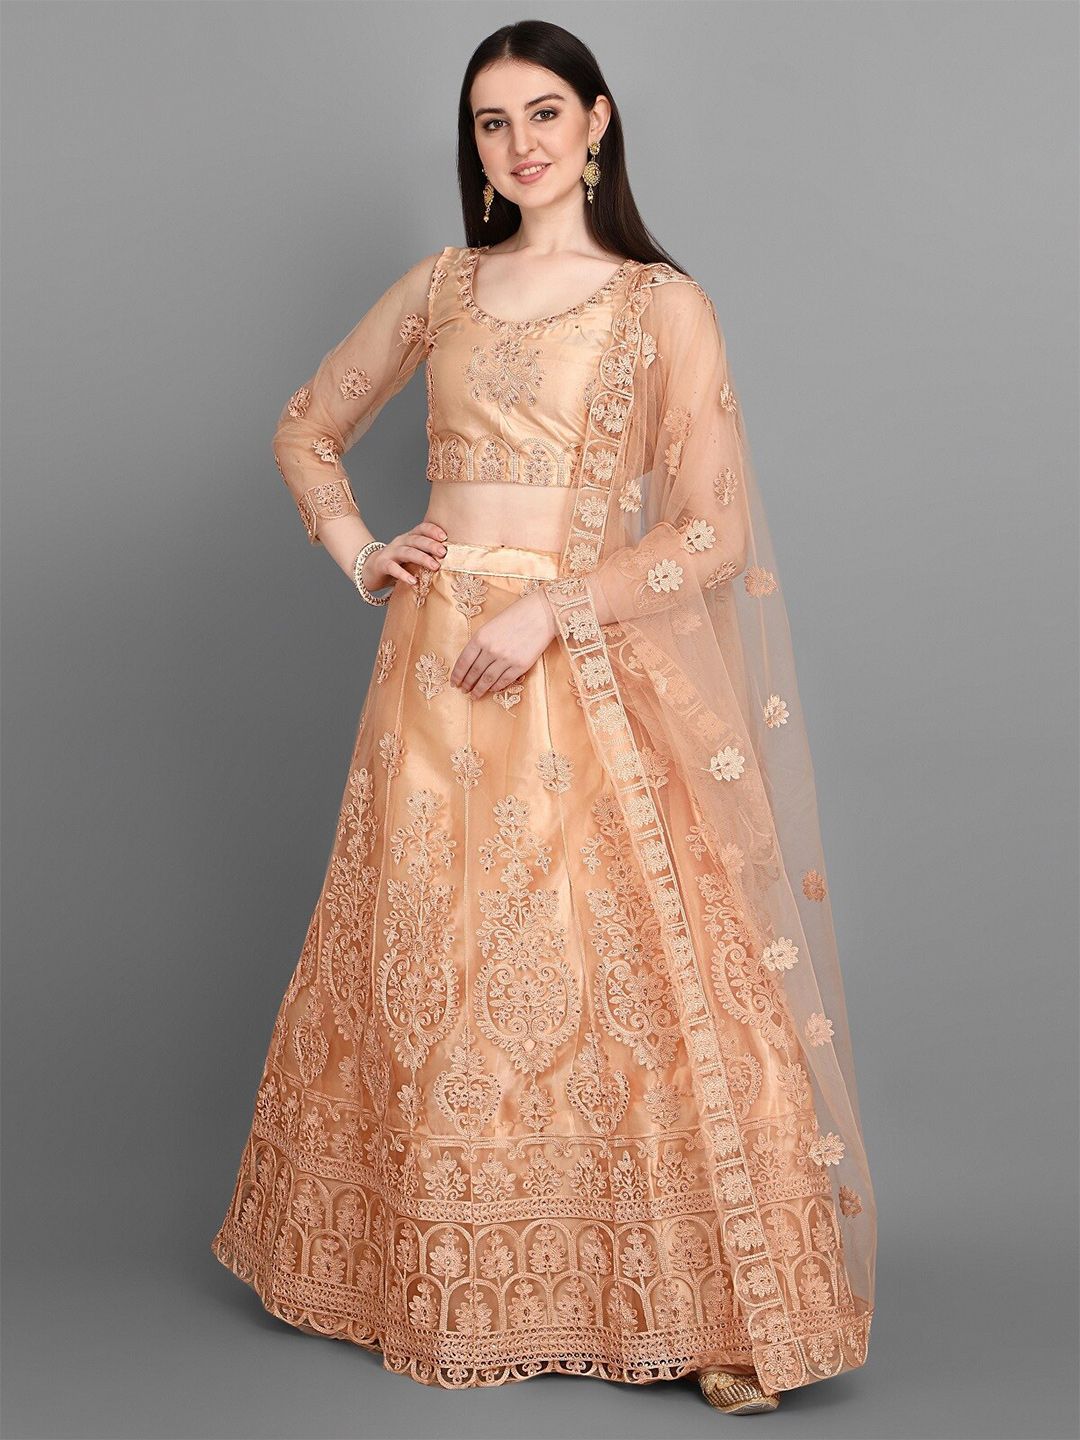 Bollyclues Cream-Coloured Embroidered Semi-Stitched Lehenga & Unstitched Blouse With Dupatta Price in India